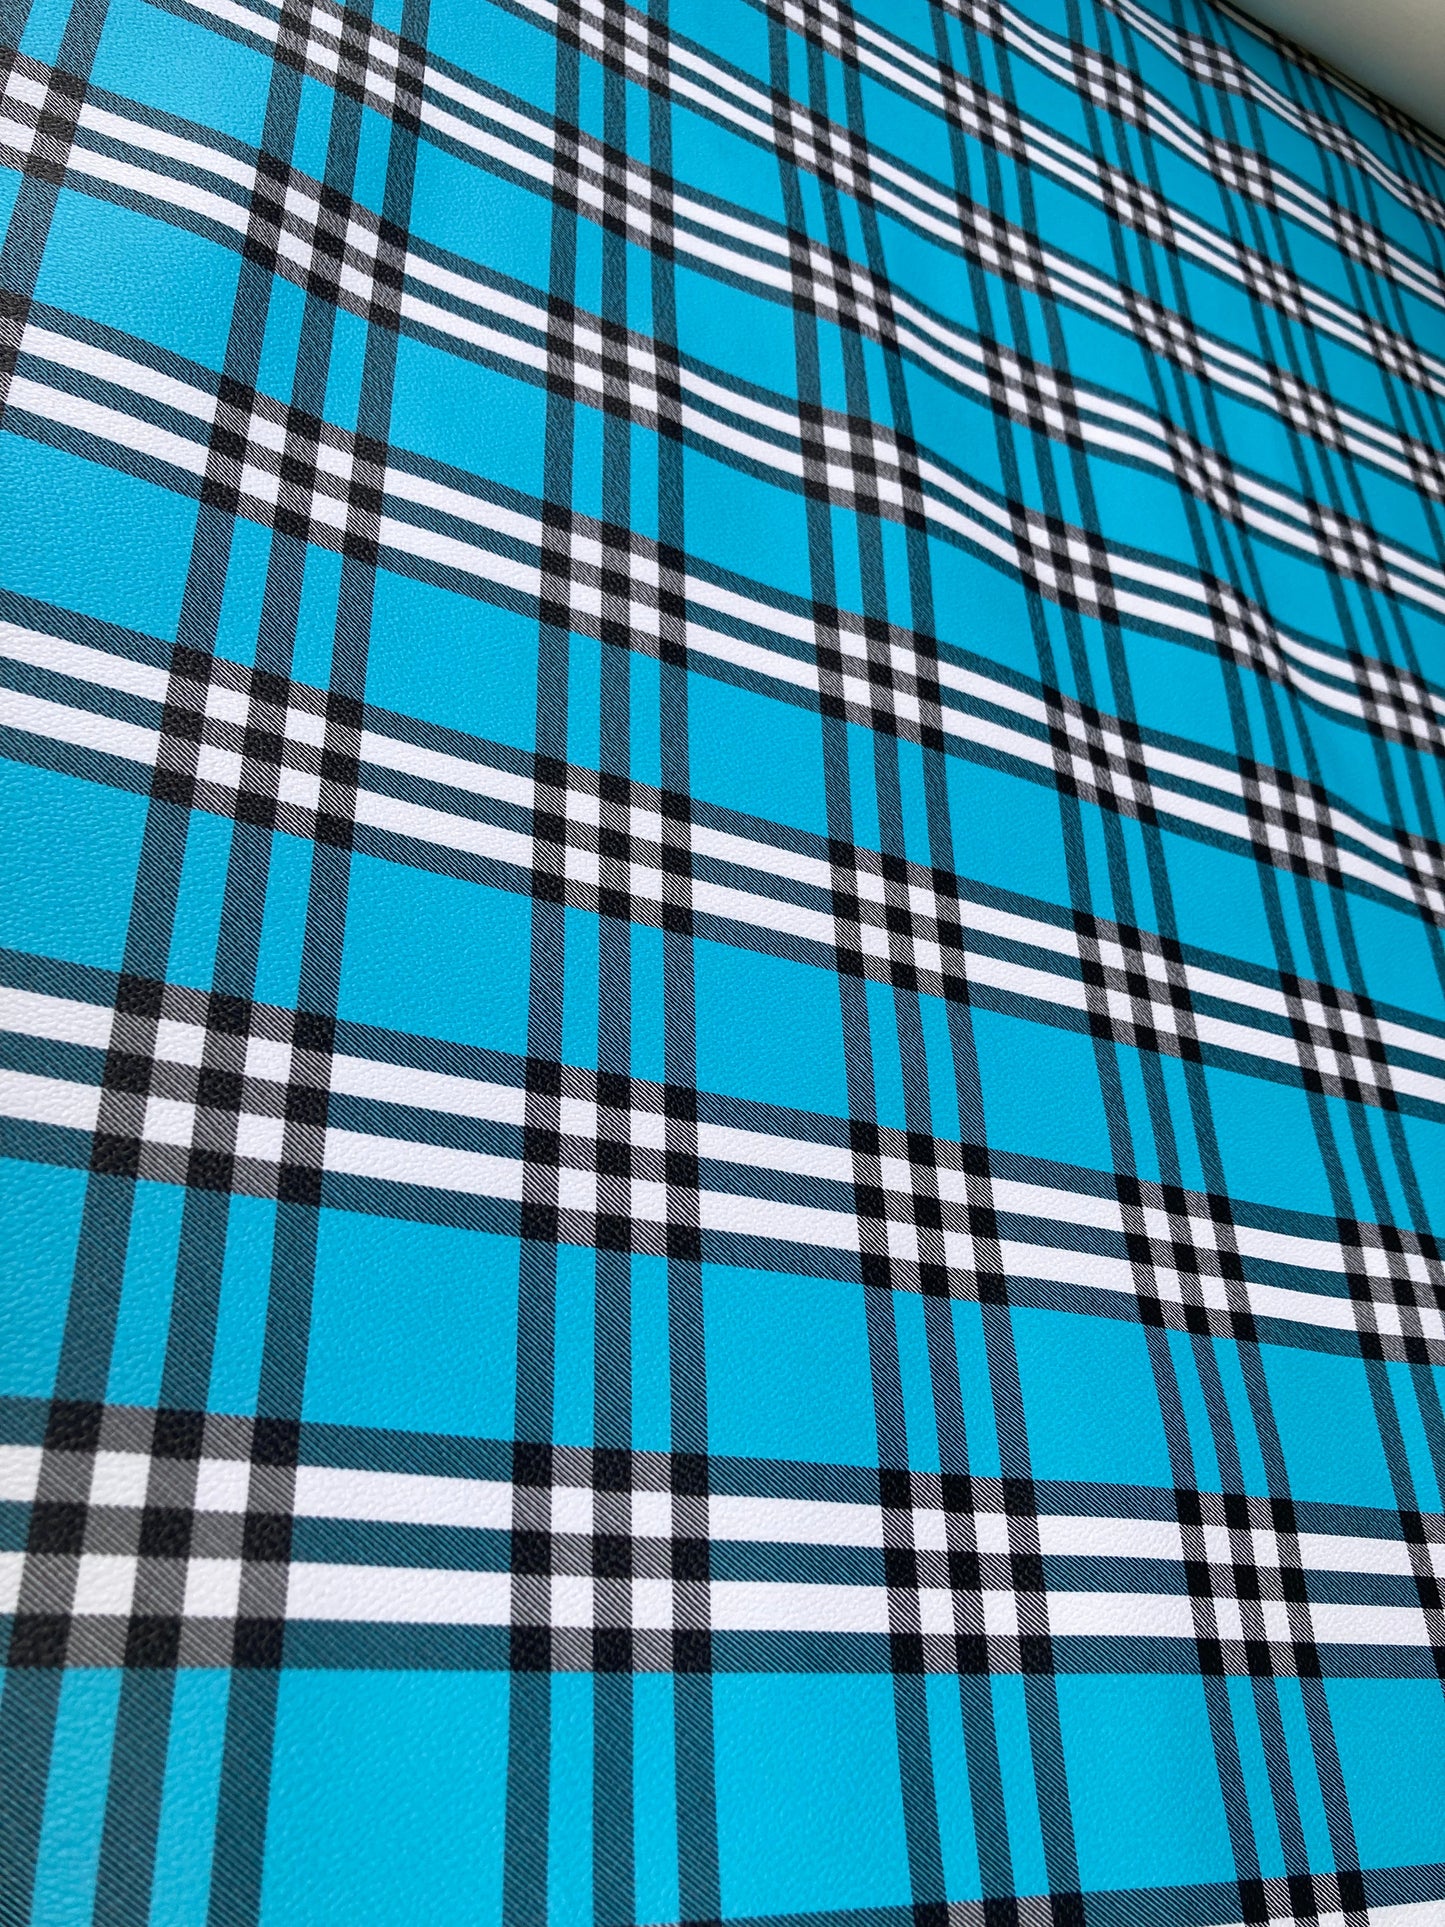 Blue Check Custom Handmade Burberry Faux Leather Fabric for DIY Arts and Crafts